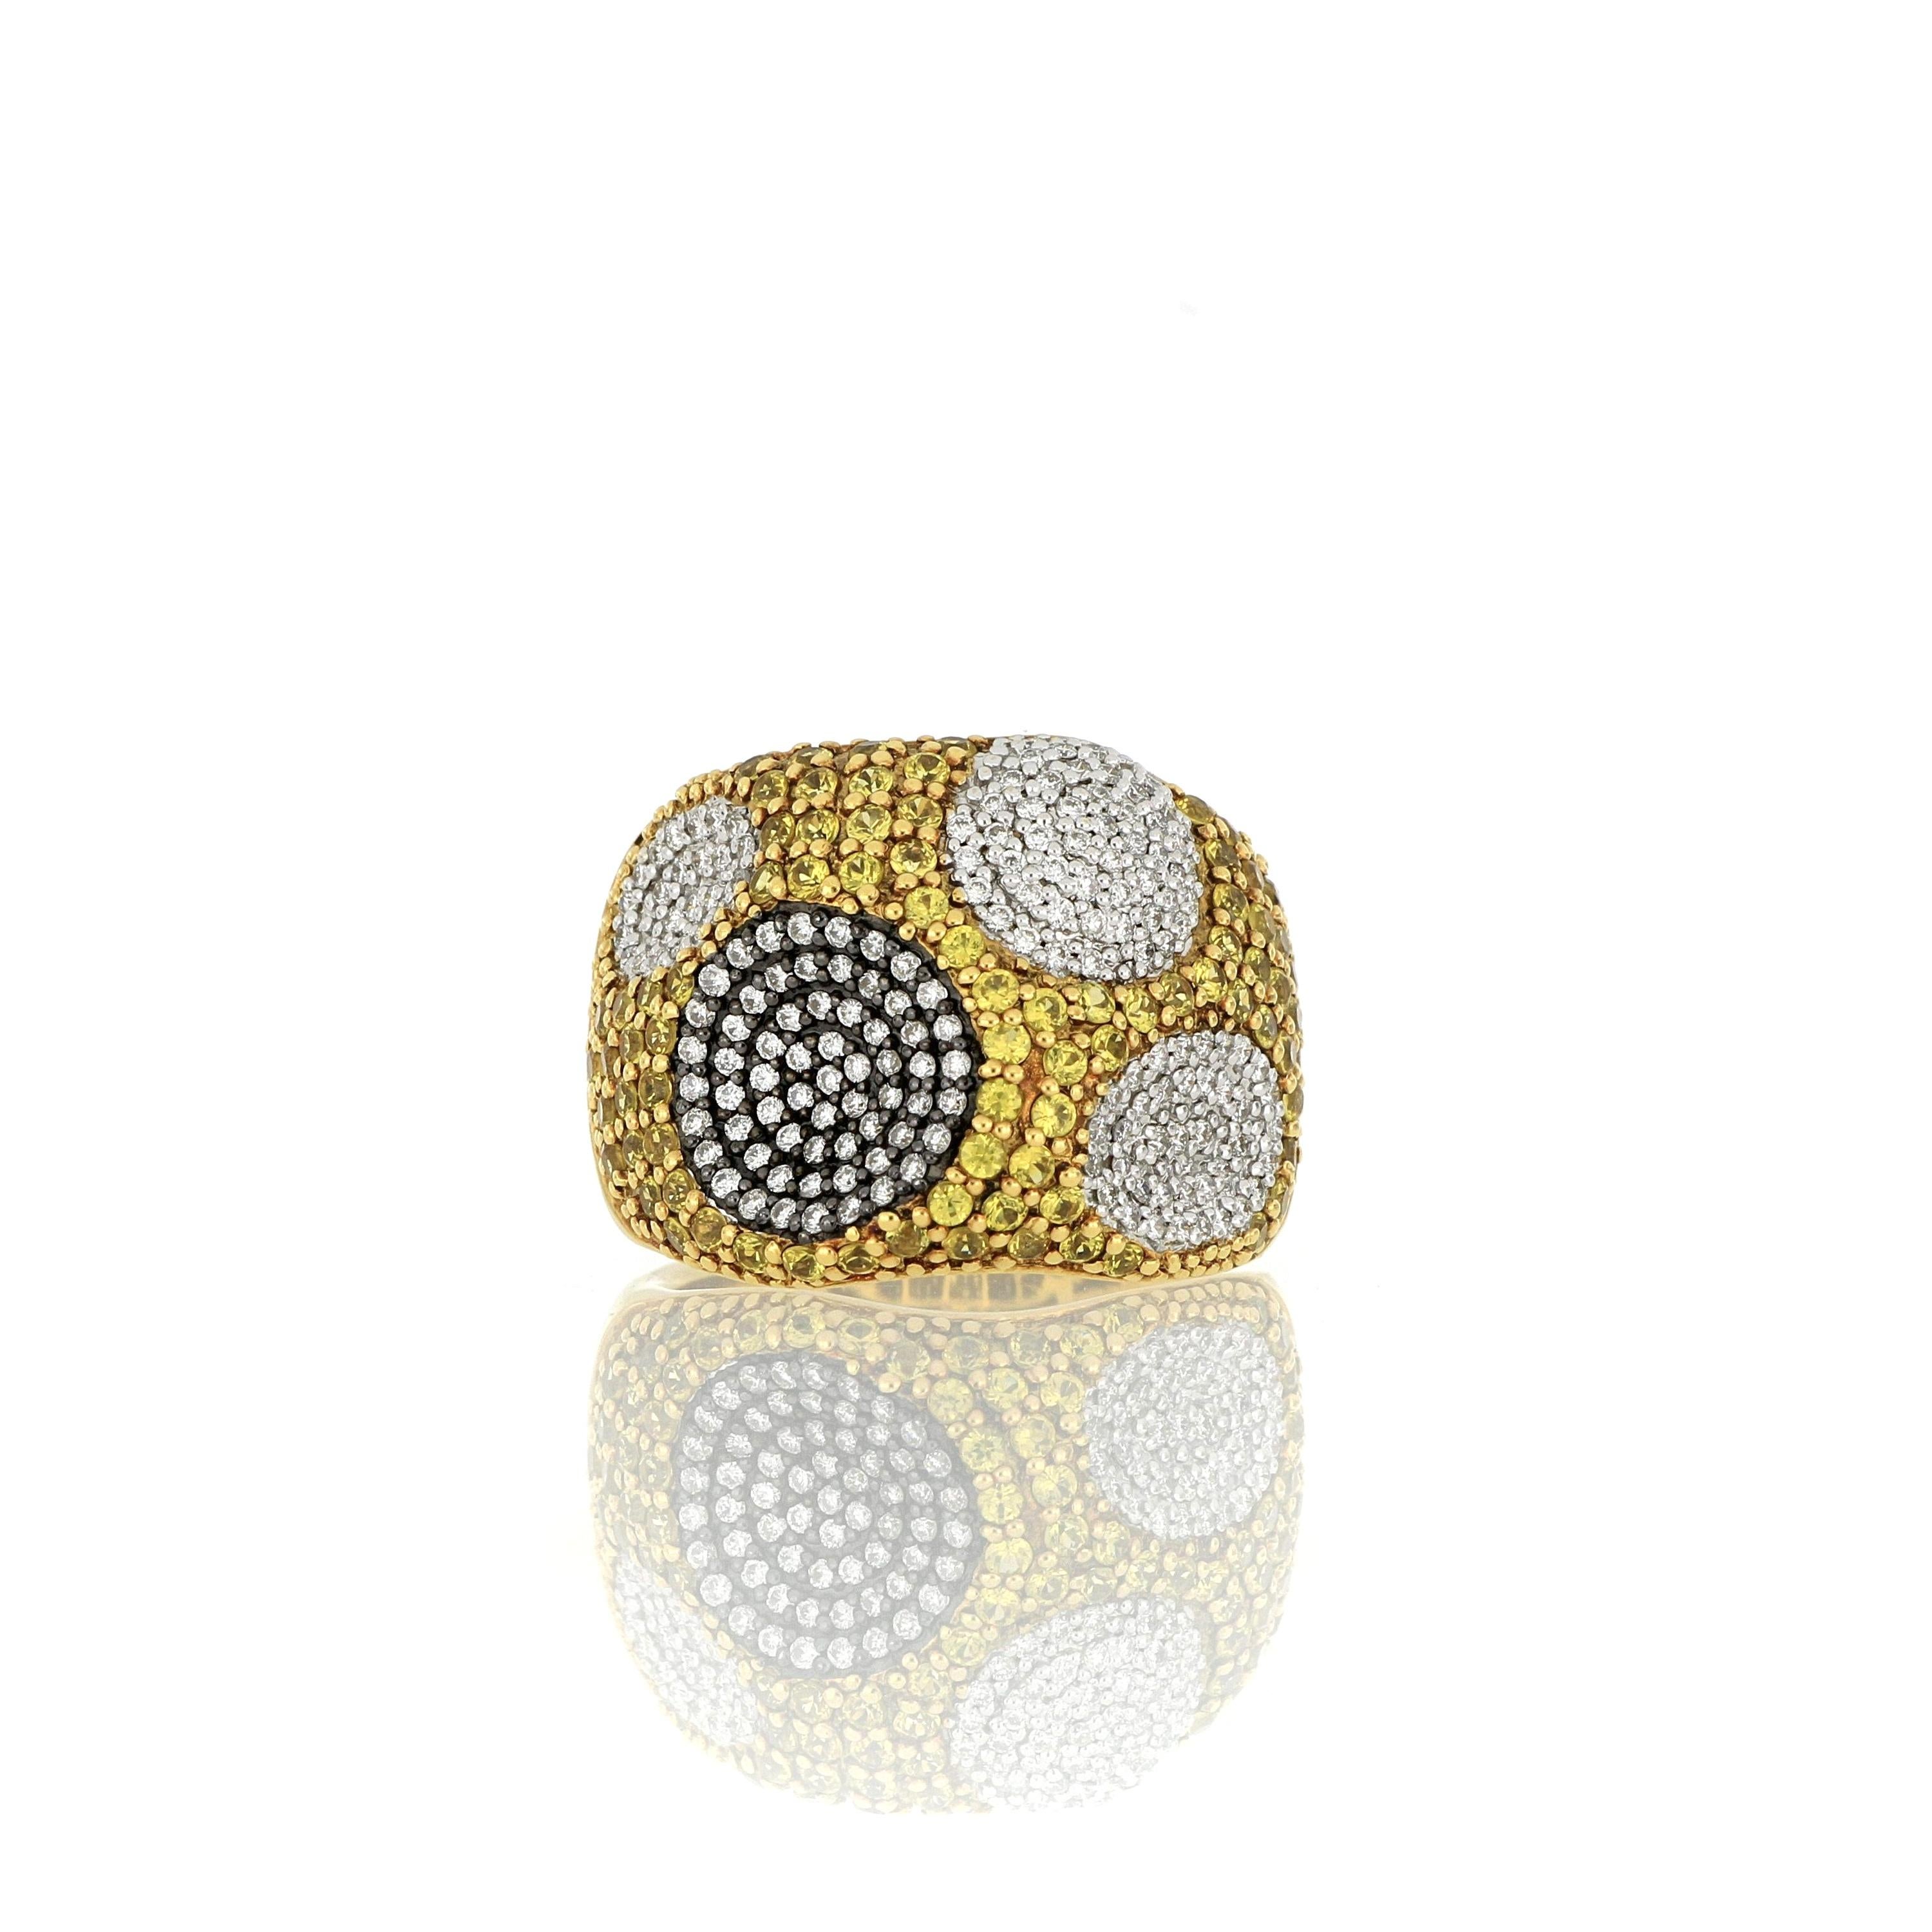 An elegant, unique and classy cocktail  ring, composed of clusters of brilliant natural yellow sapphire and diamonds, weighing approximately 1.47 carats and  0.73 carats respectively, mounted in 18 Karat gold.
O’Che 1867 is renowned for its high